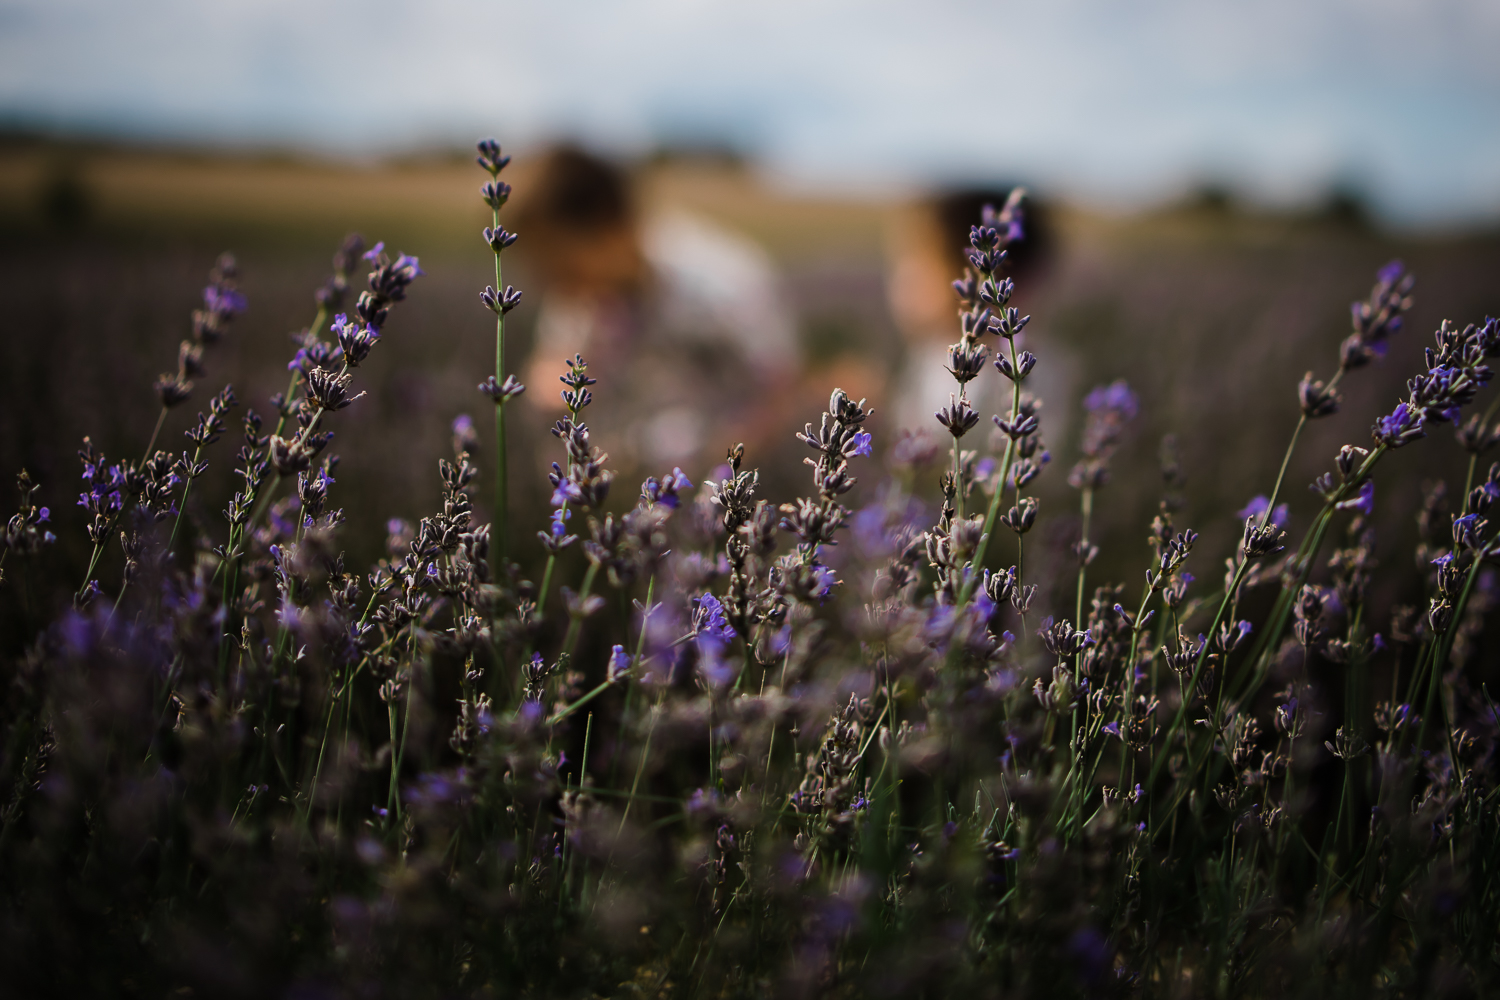 Dreamy childhood in the lavender - Cambridge family photographer